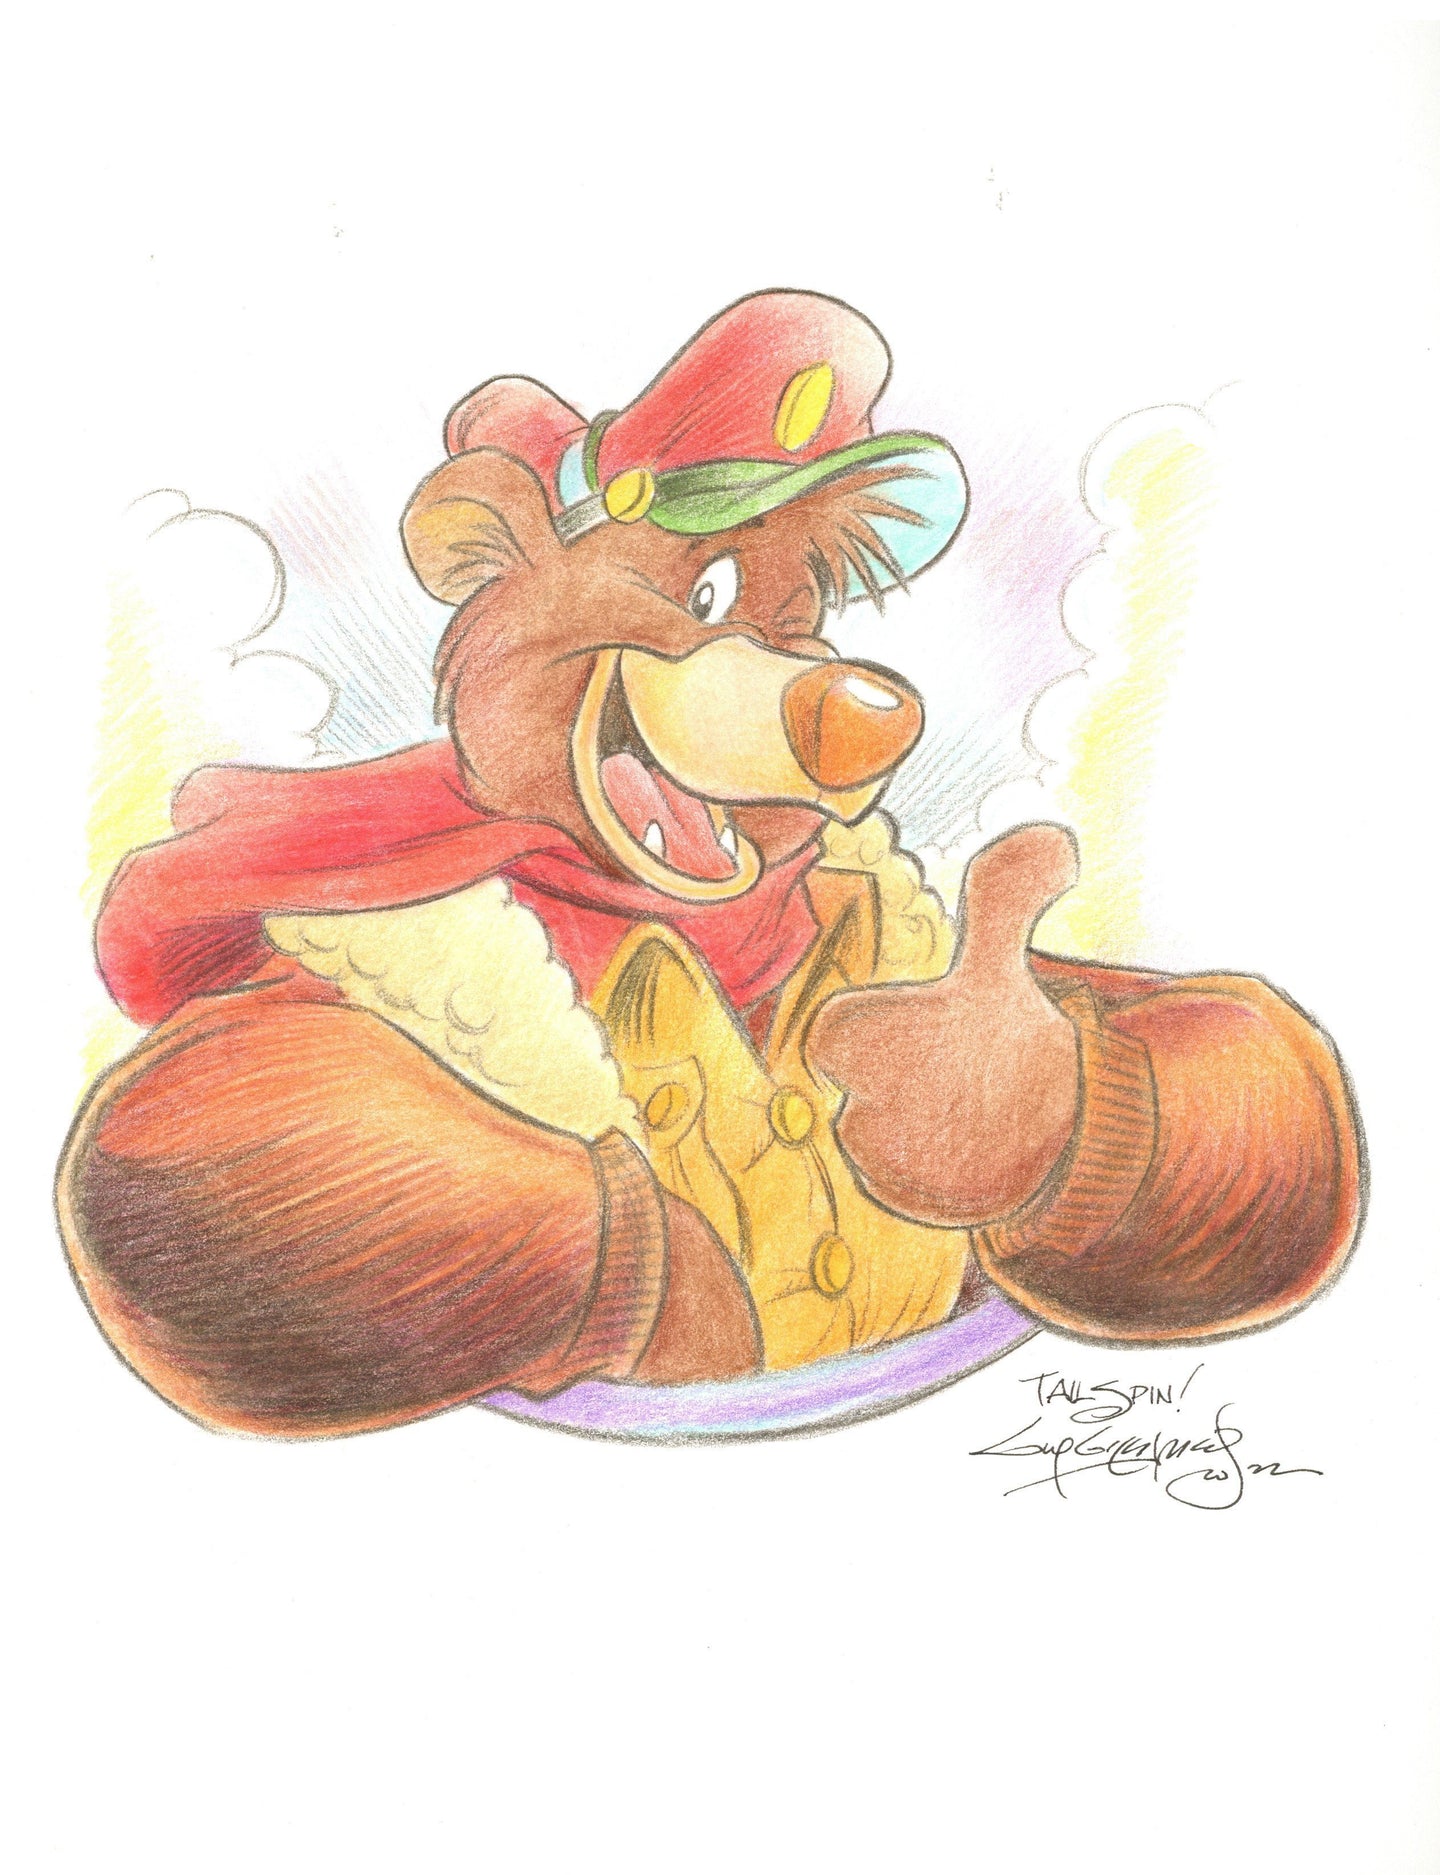 Tailspin Baloo Original Art 8.5x11 Sketch - Created by Guy Gilchrist